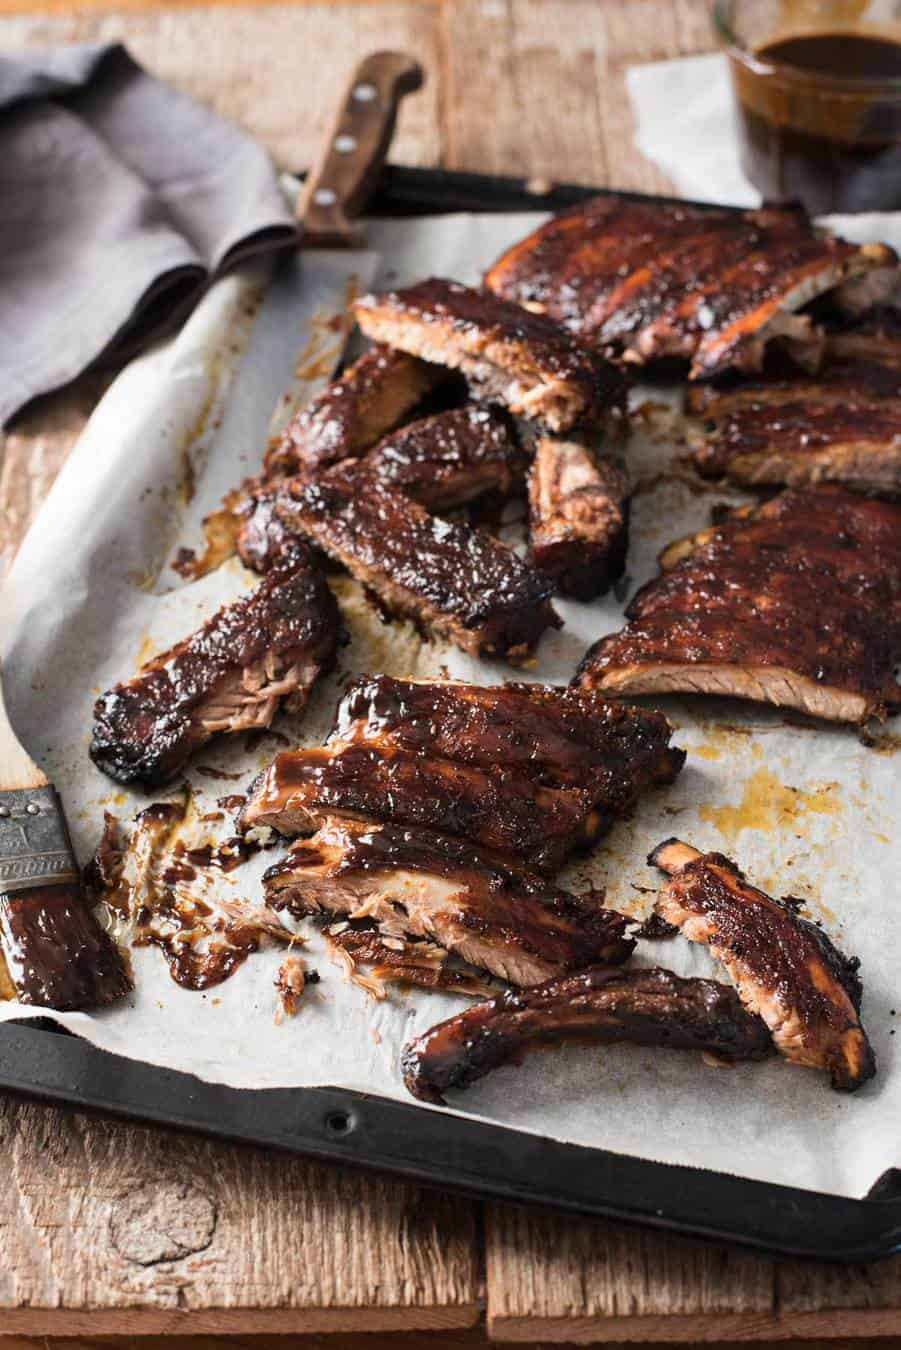 Oven Baked Pork Ribs Recipe
 Oven Baked Barbecue Pork Ribs